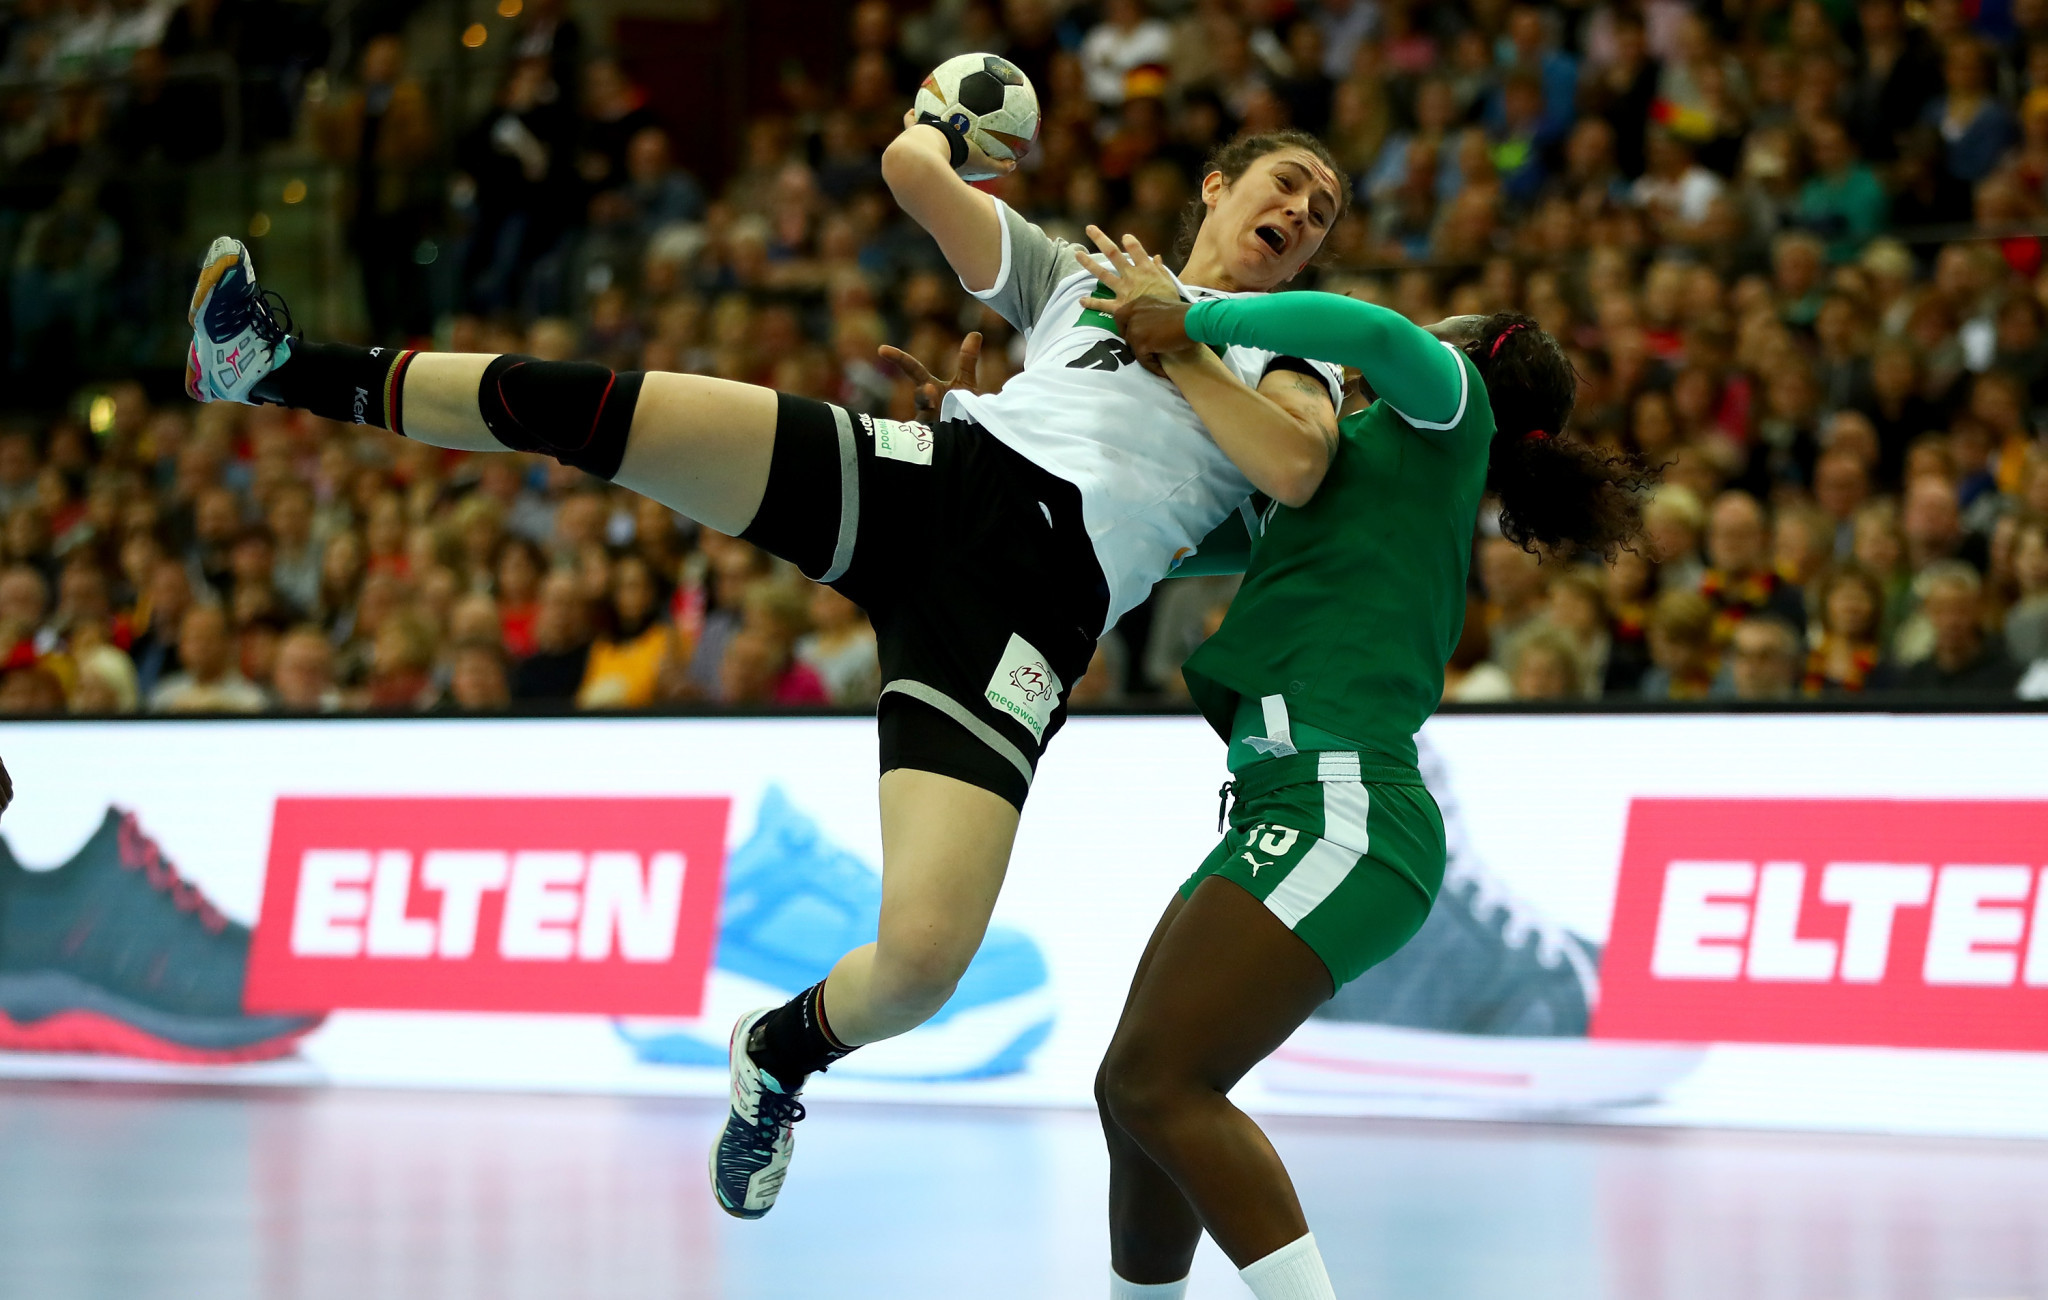 Hosts Germany open with comfortable win over Cameroon at Women's Handball World Championship